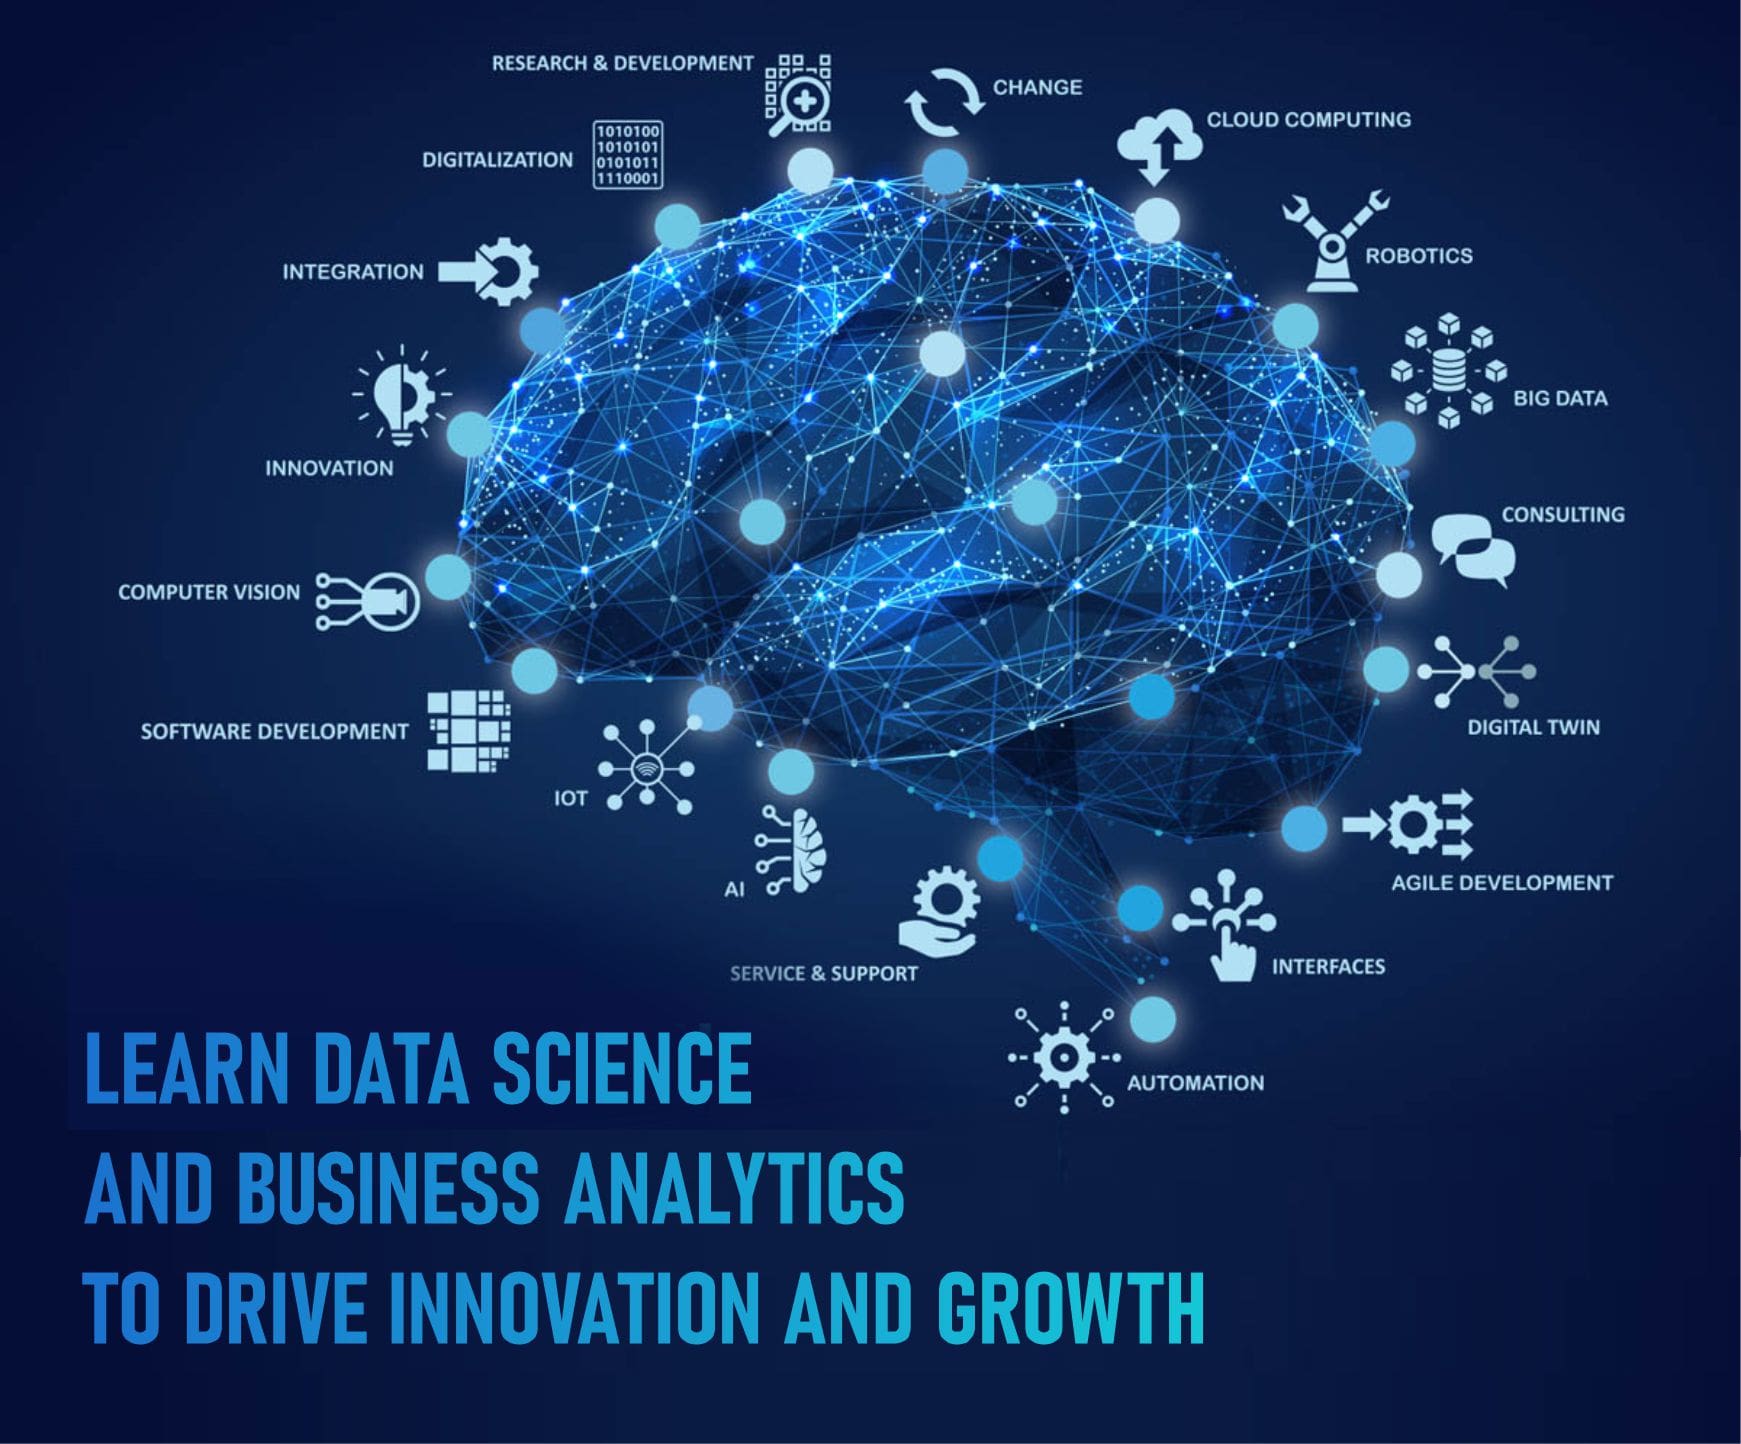 Learn Data Science and Business Analytics to Drive Innovation and Growth